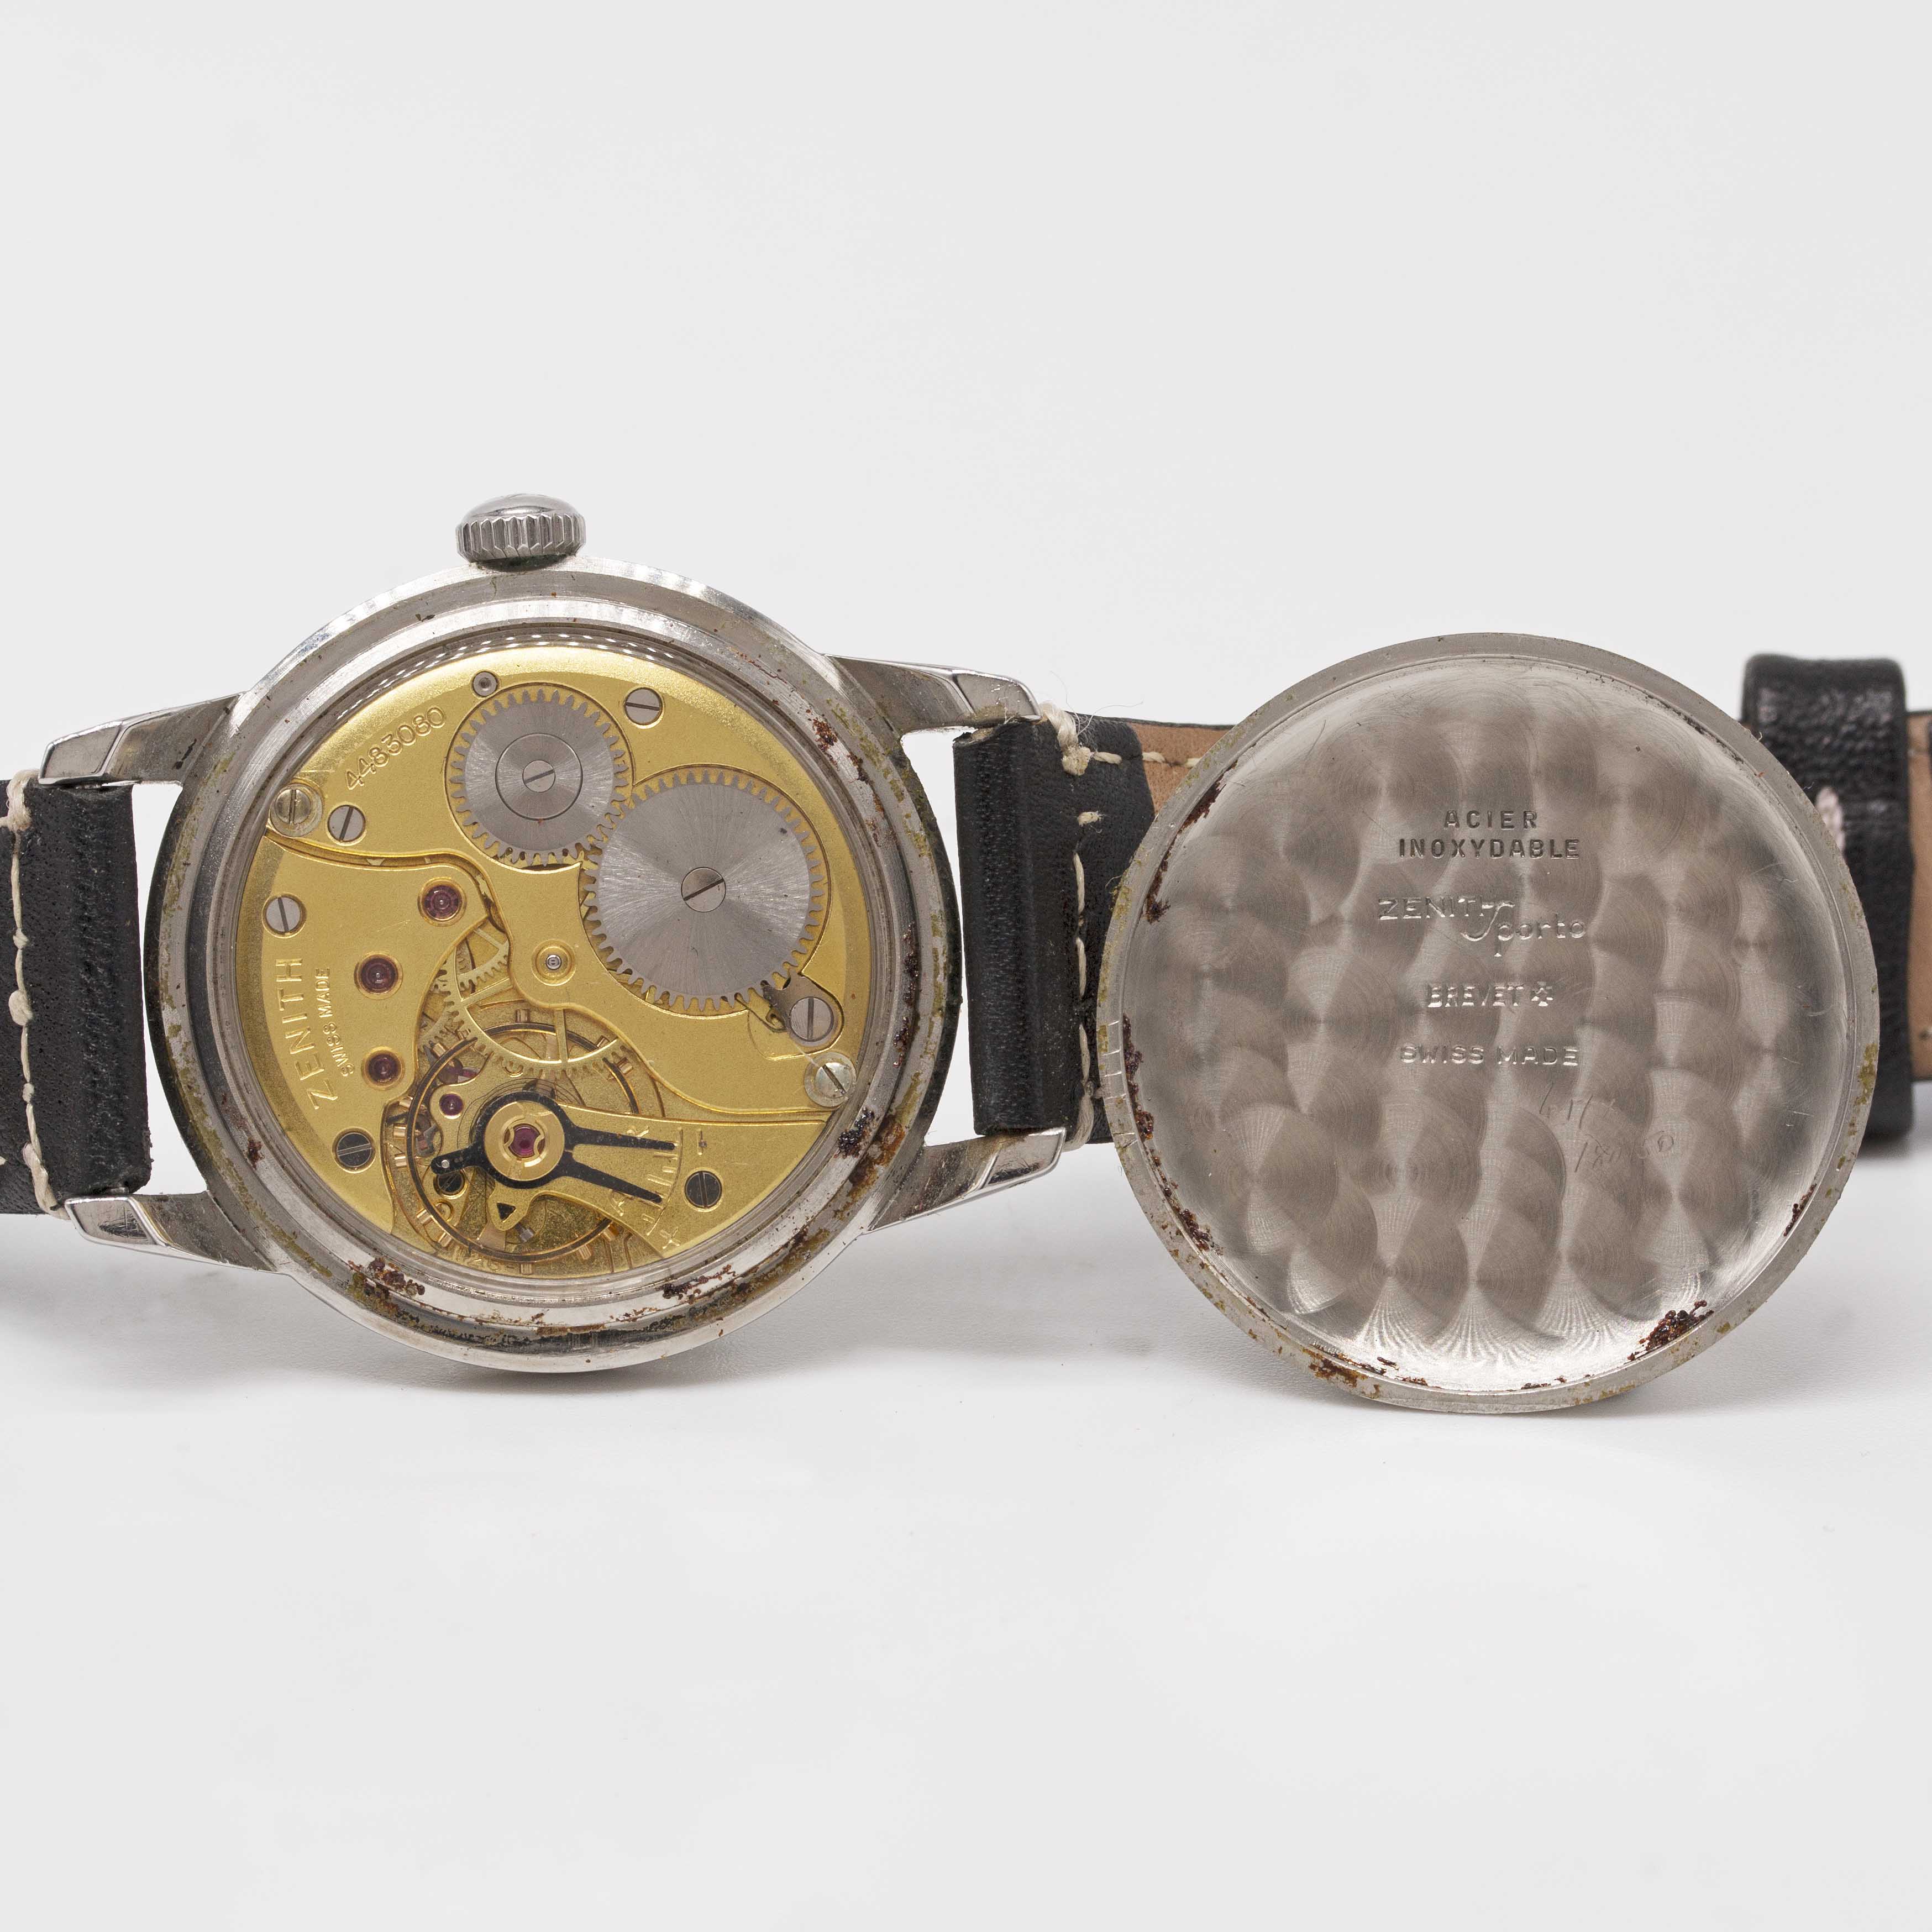 A GENTLEMAN'S STAINLESS STEEL ZENITH SPORTO WRIST WATCH CIRCA 1960, RETAILED BY TARRATT WITH CO- - Image 6 of 8